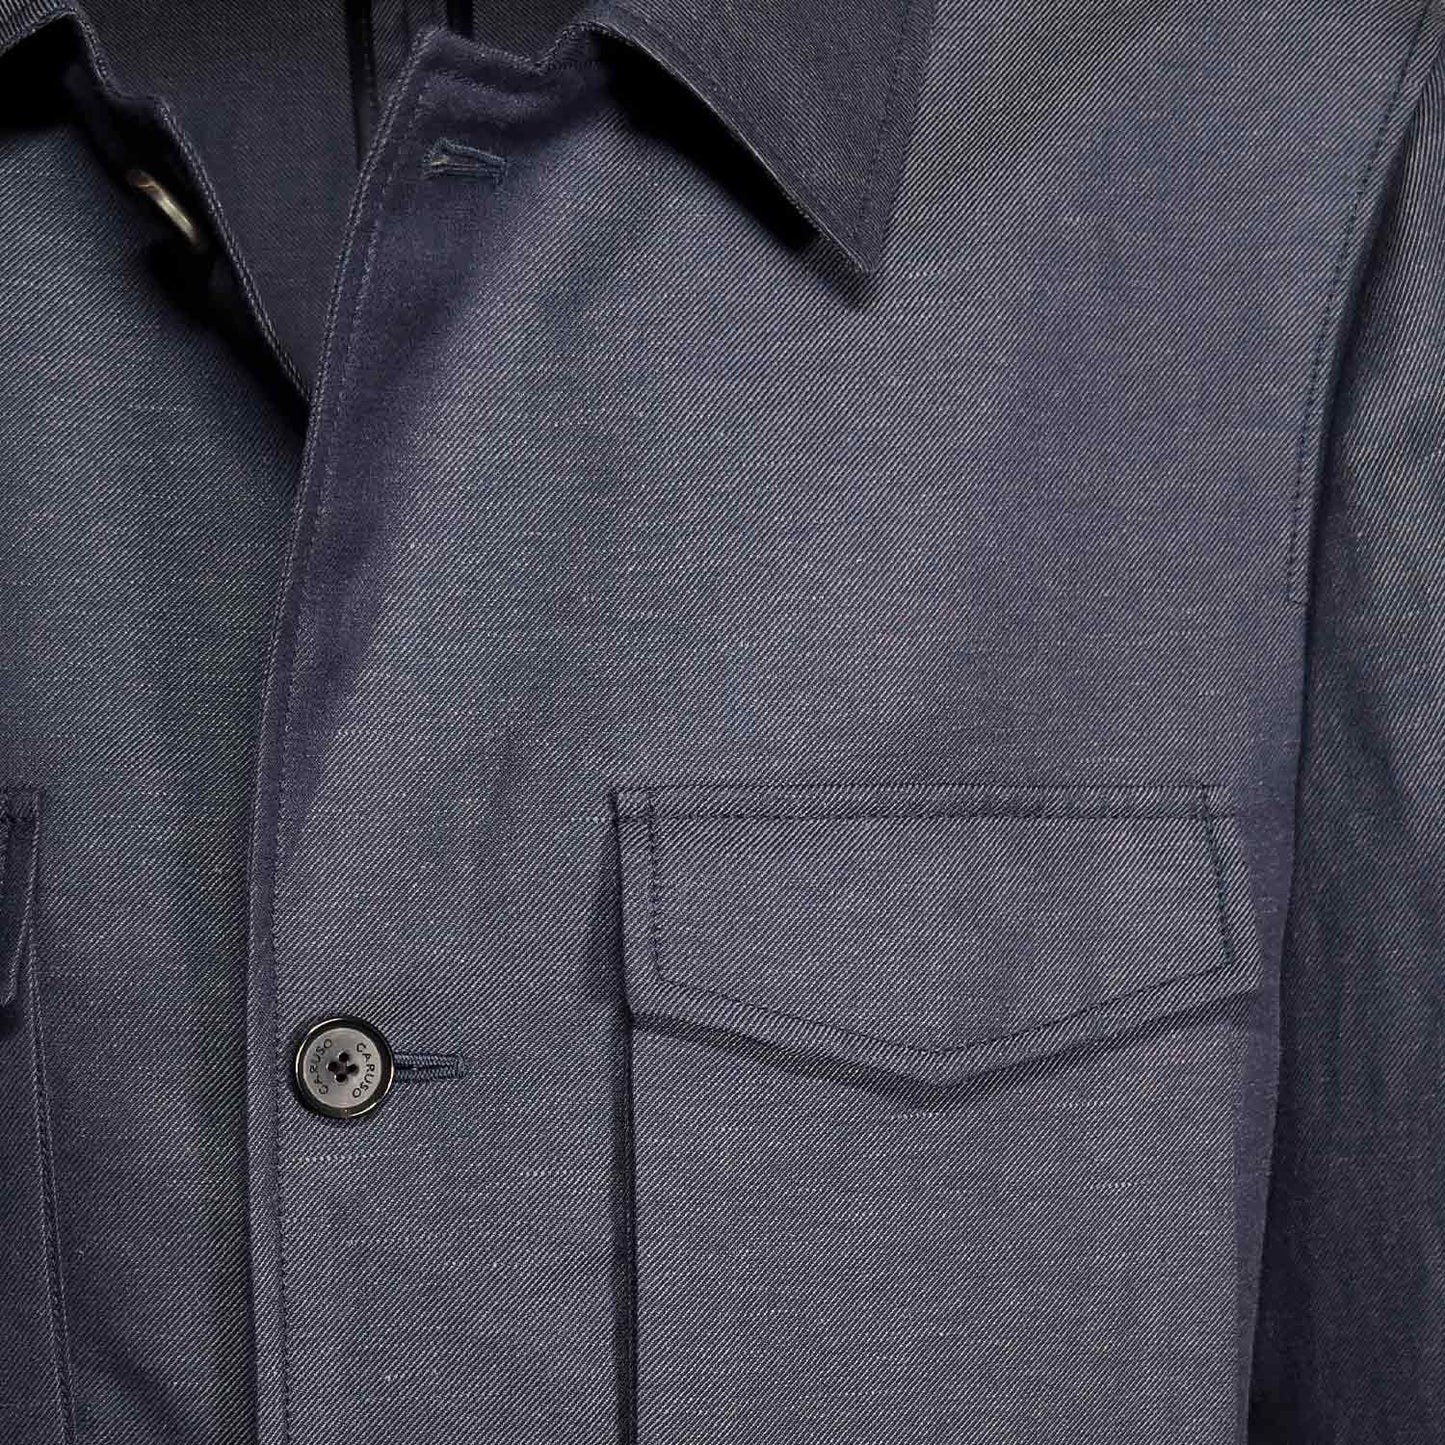 Men's Field Jacket Wool Linen Denim Blue. Timeless men's field jacket is a best solution for the man who wants a refined work sport jacket to wear every day over all outfit. Tailoring sport jacket by Caruso exclusively for Wools Boutique Uomo, made with wool and linen fabric ideal from spring to autumn season, soft to the touch and light.